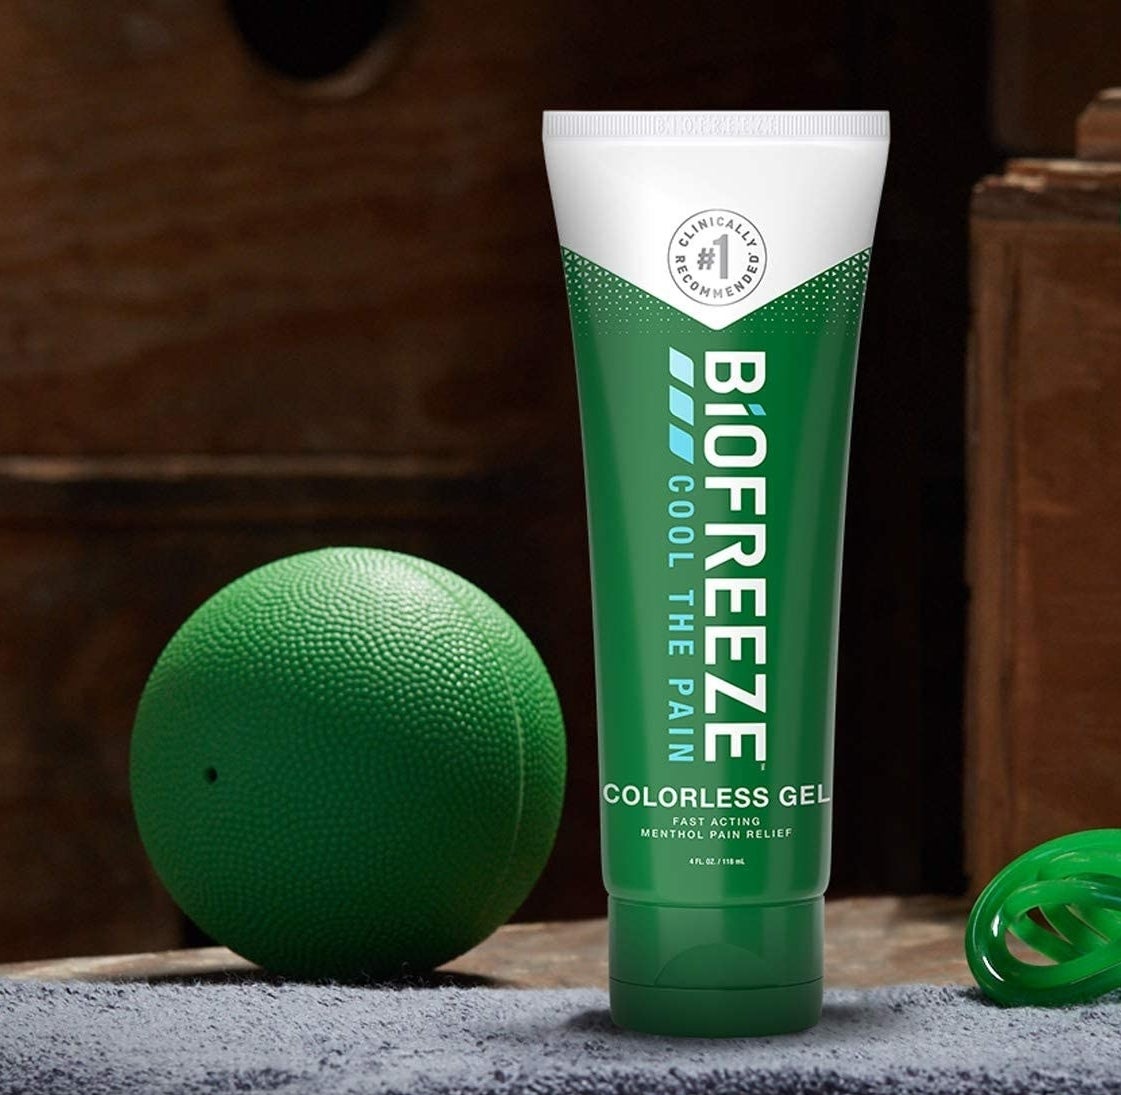 the green bottle of pain relieving gel